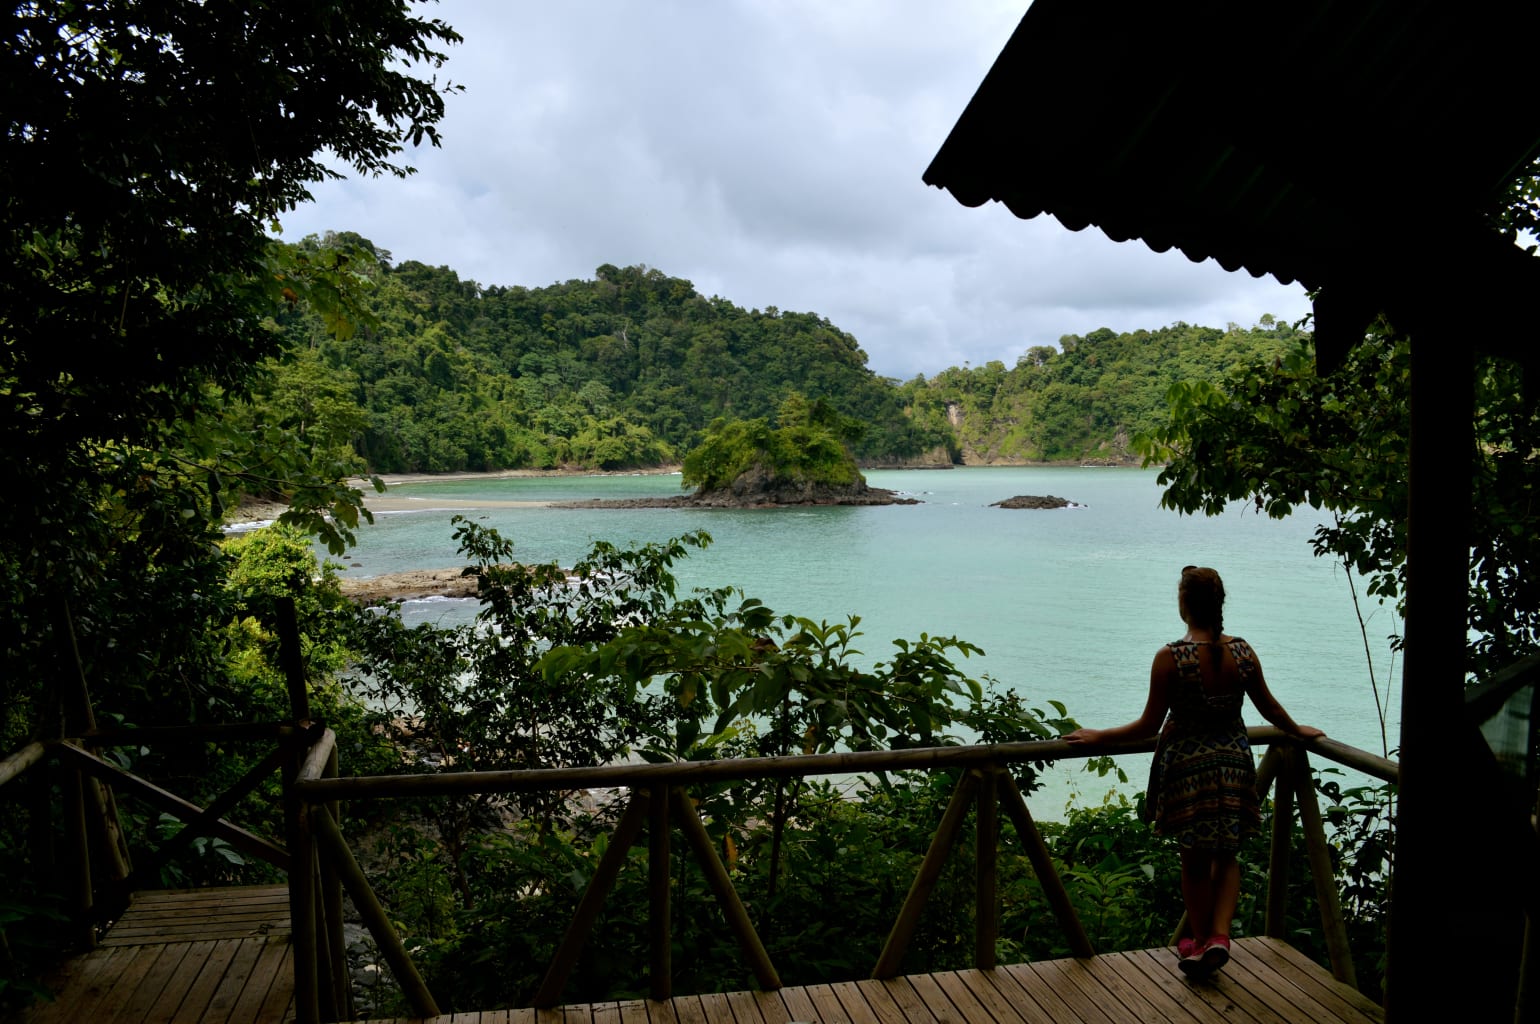 A student looking out to a view of the water in Costa Rica.